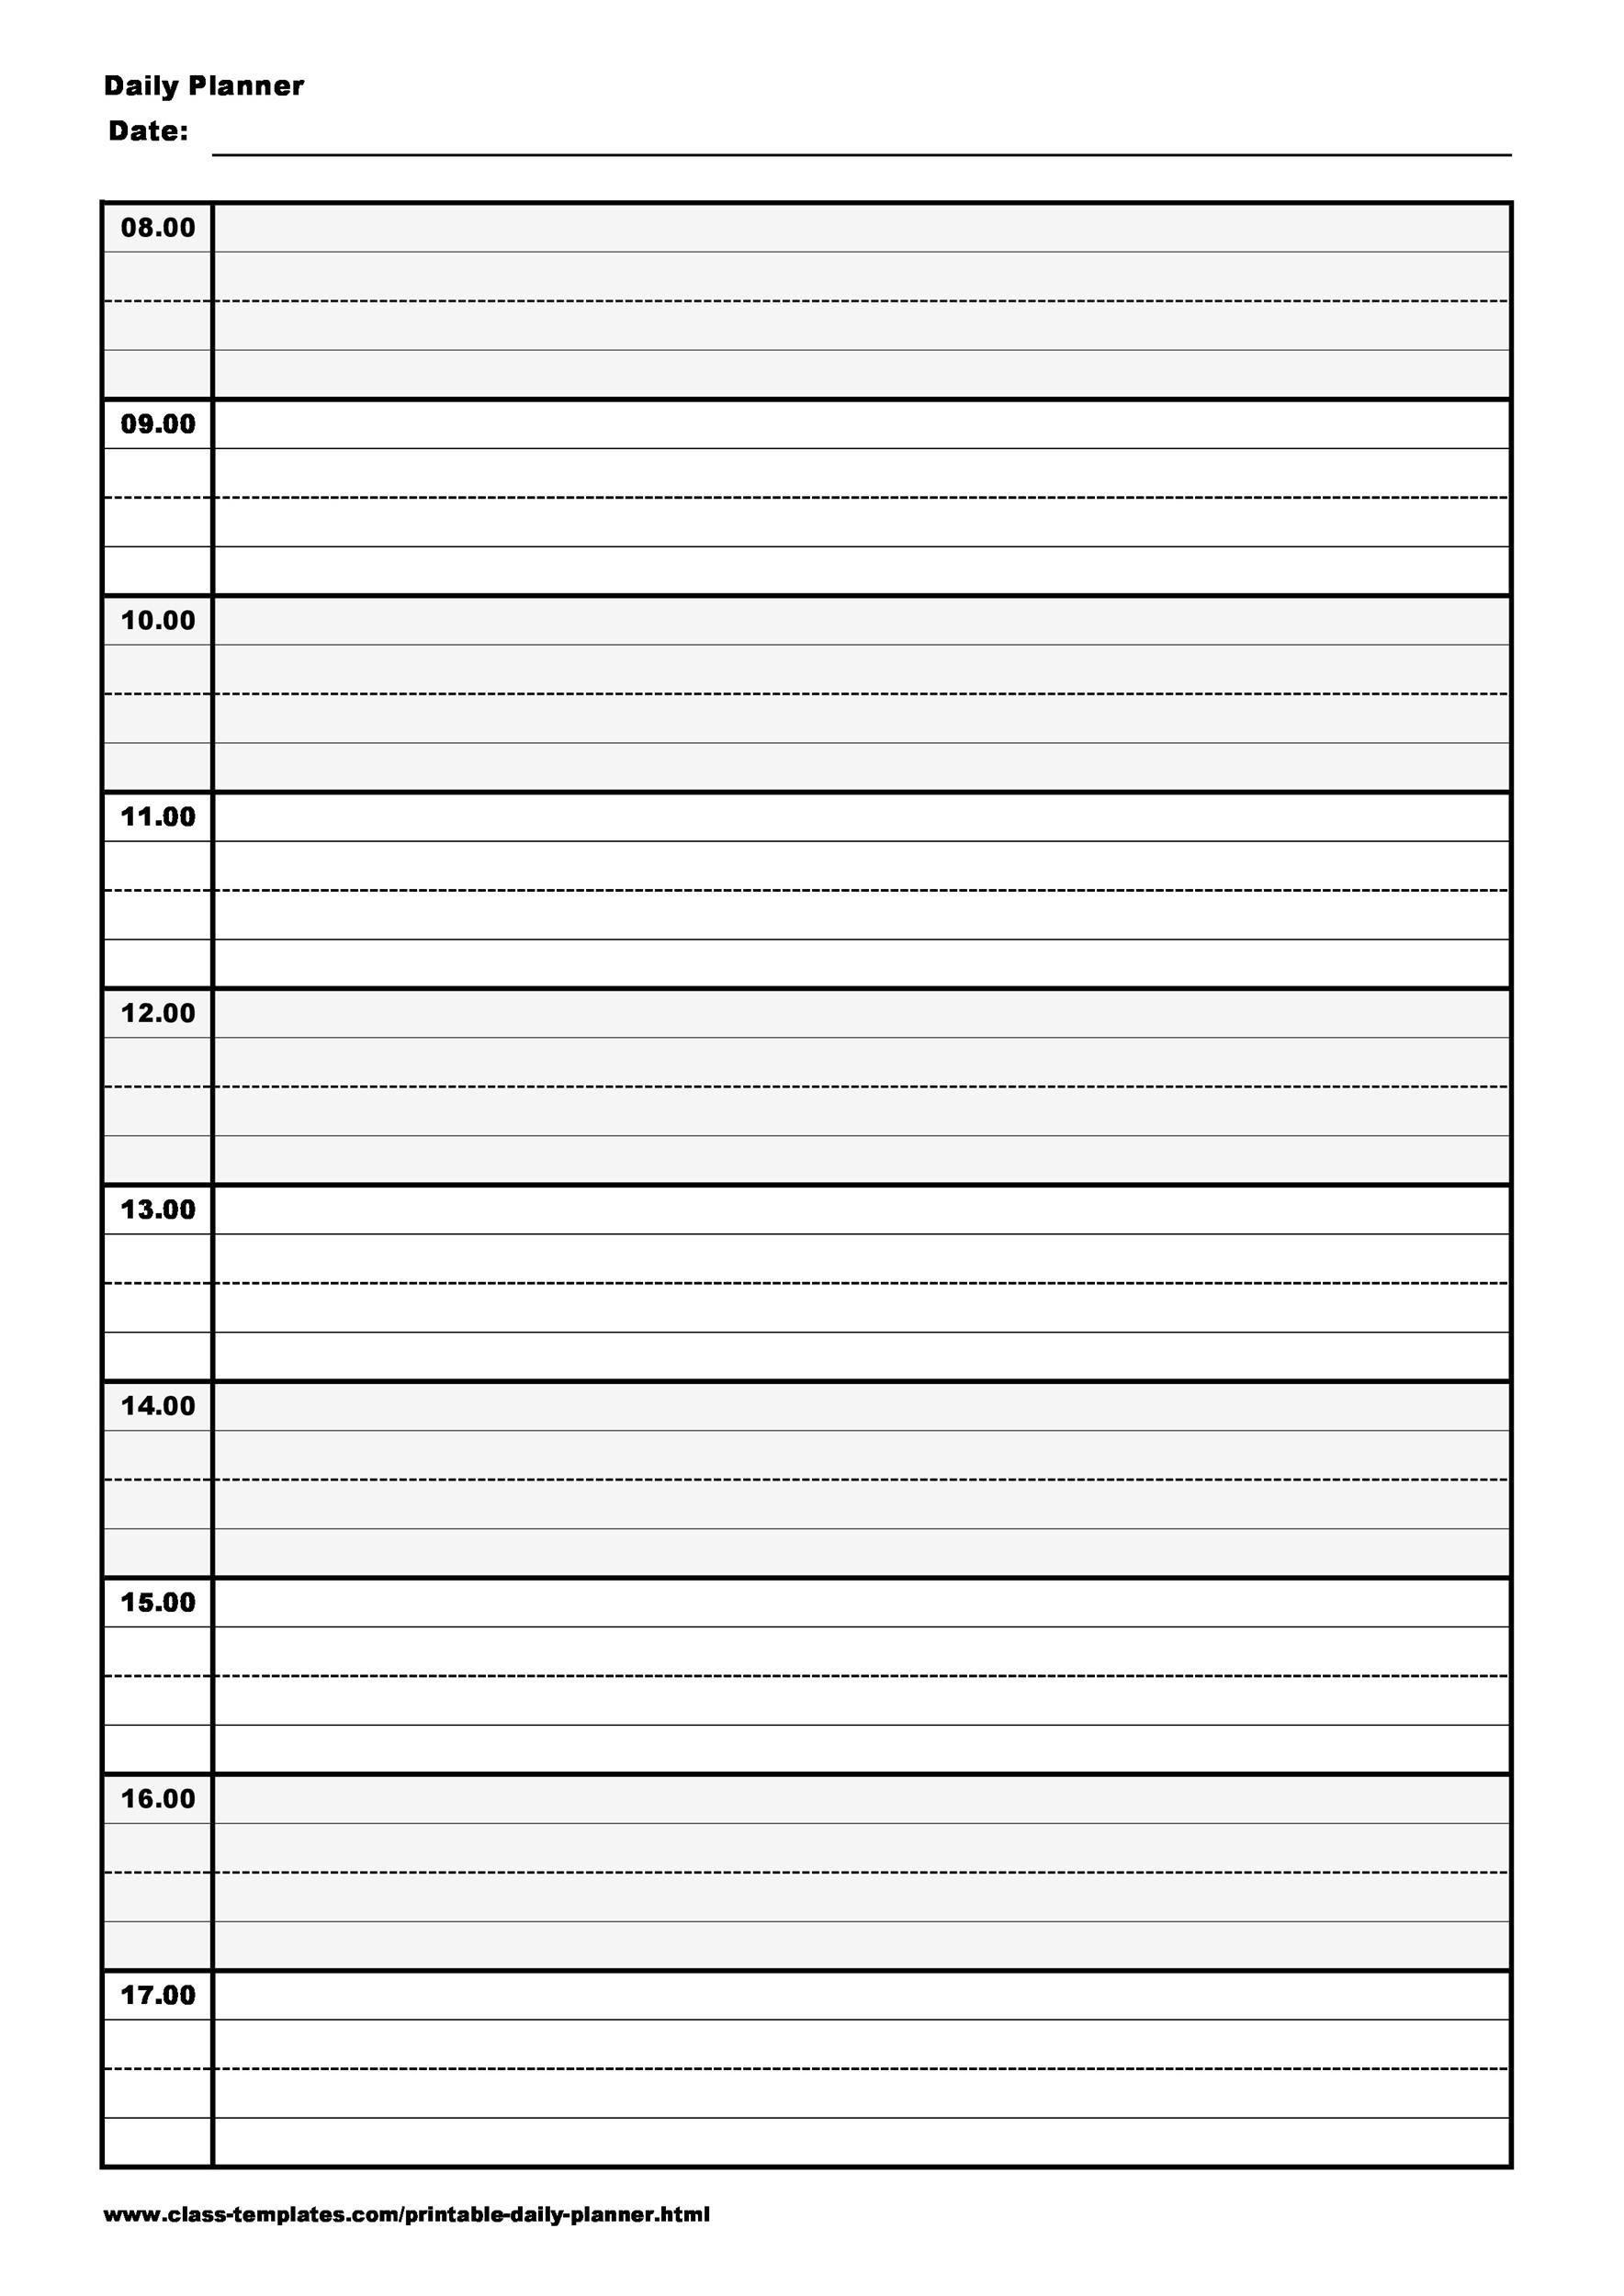 Pick Day Time Schedule Sheet 15 Min